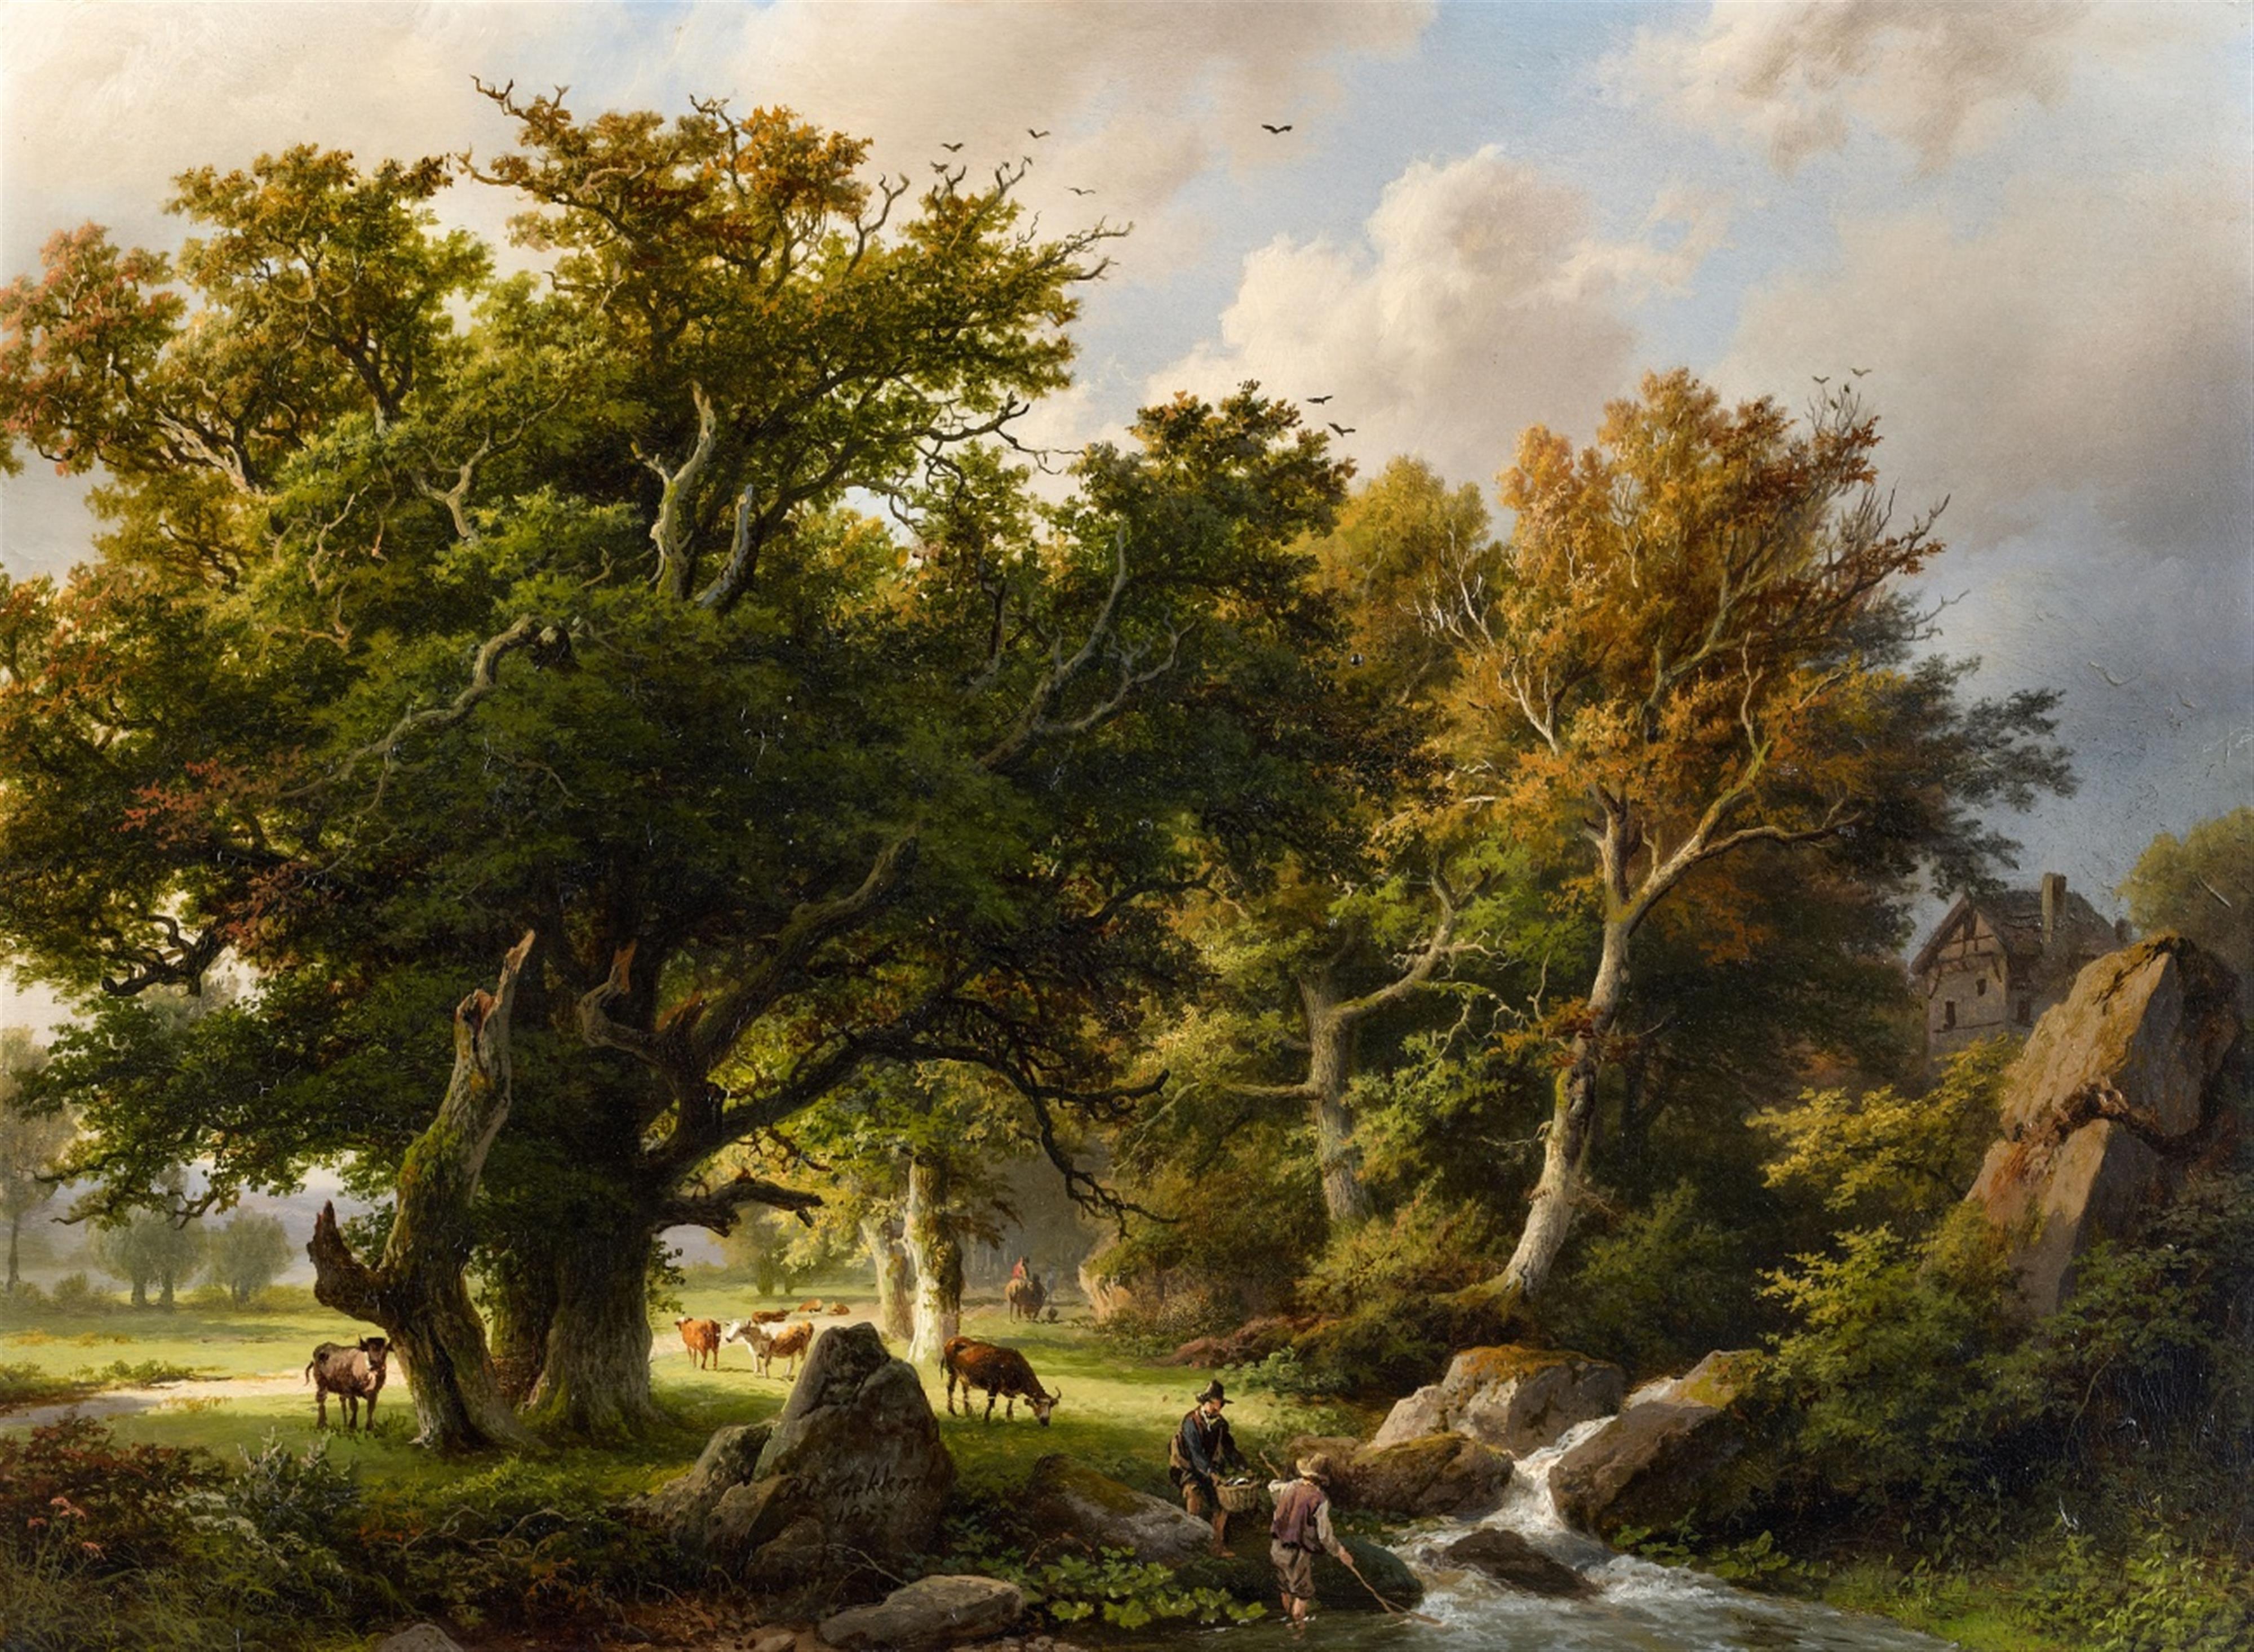 Barend Cornelis Koekkoek - Landscape with Trees and Cows by a Stream - image-1